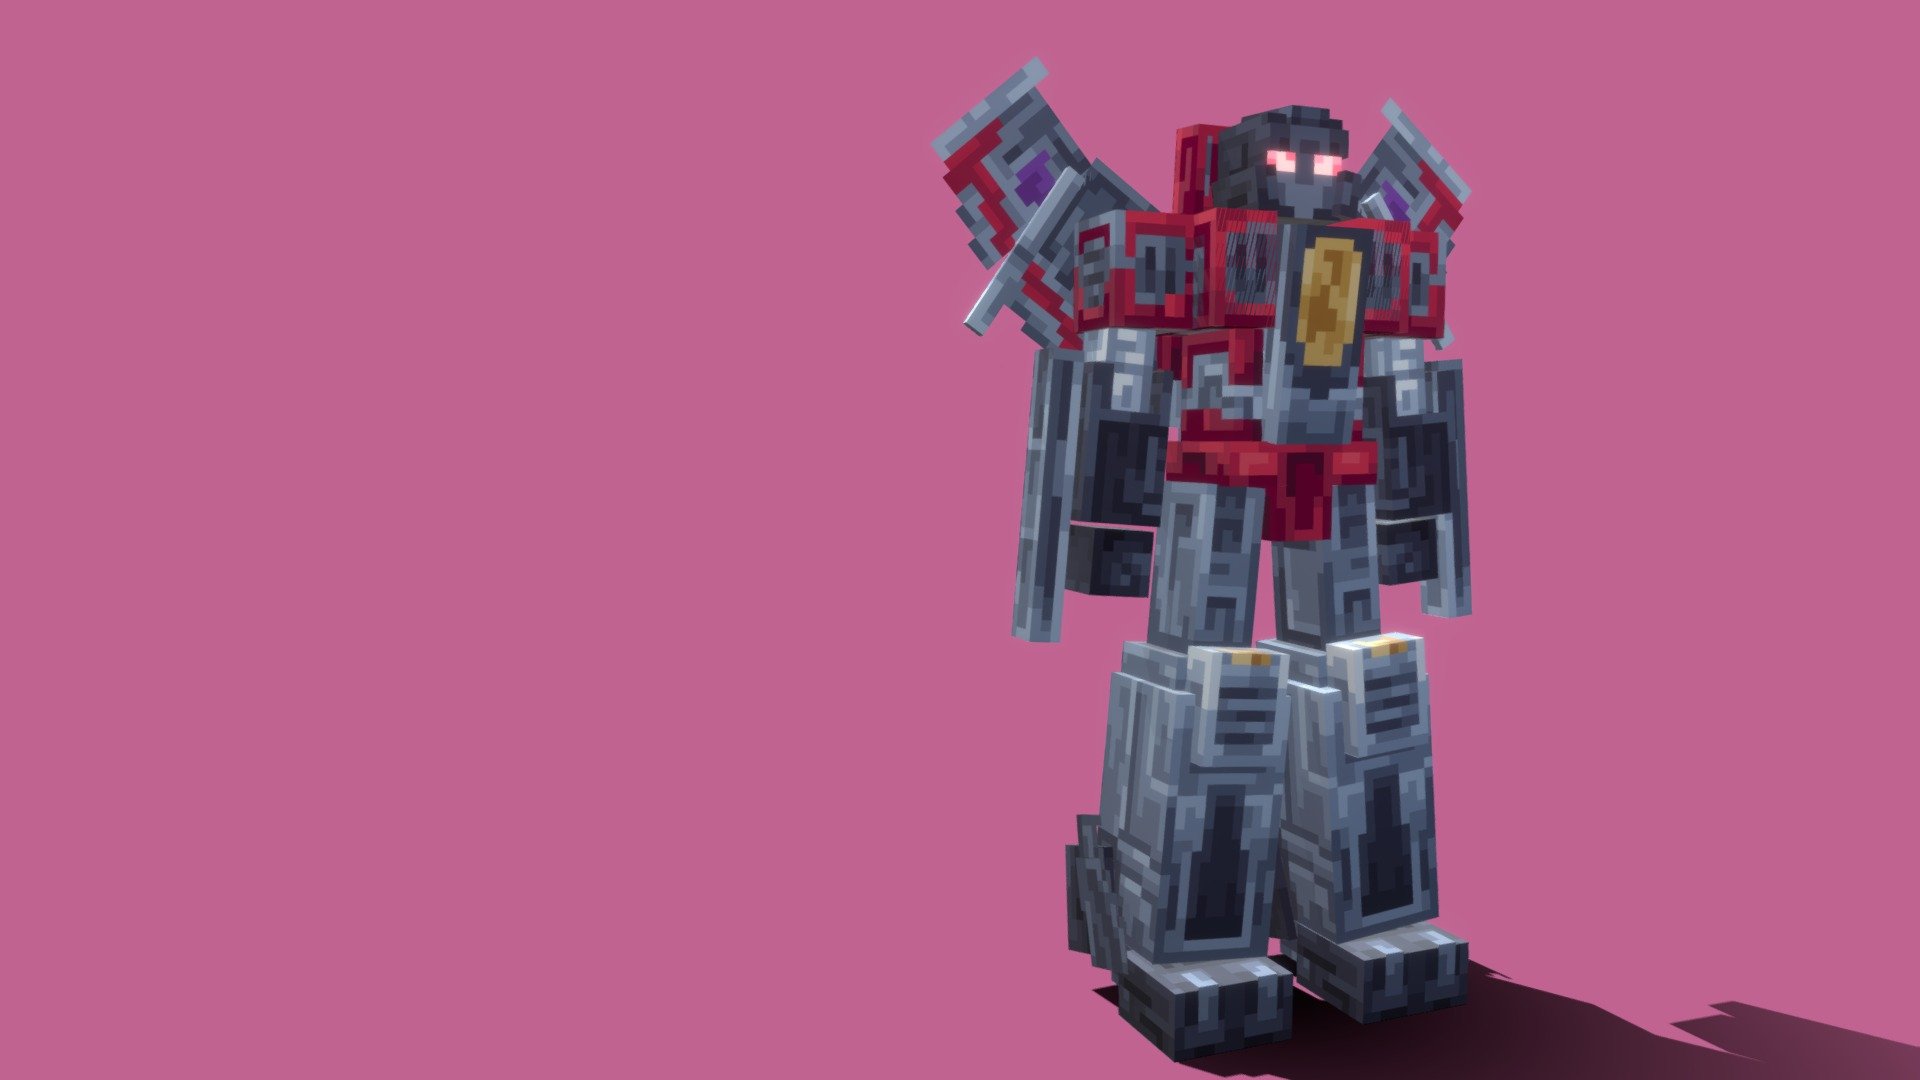 Transformers Starscream in a low-poly and Minecrafty style Made in bockbench - Starscream - 3D model by Natzival 3d model